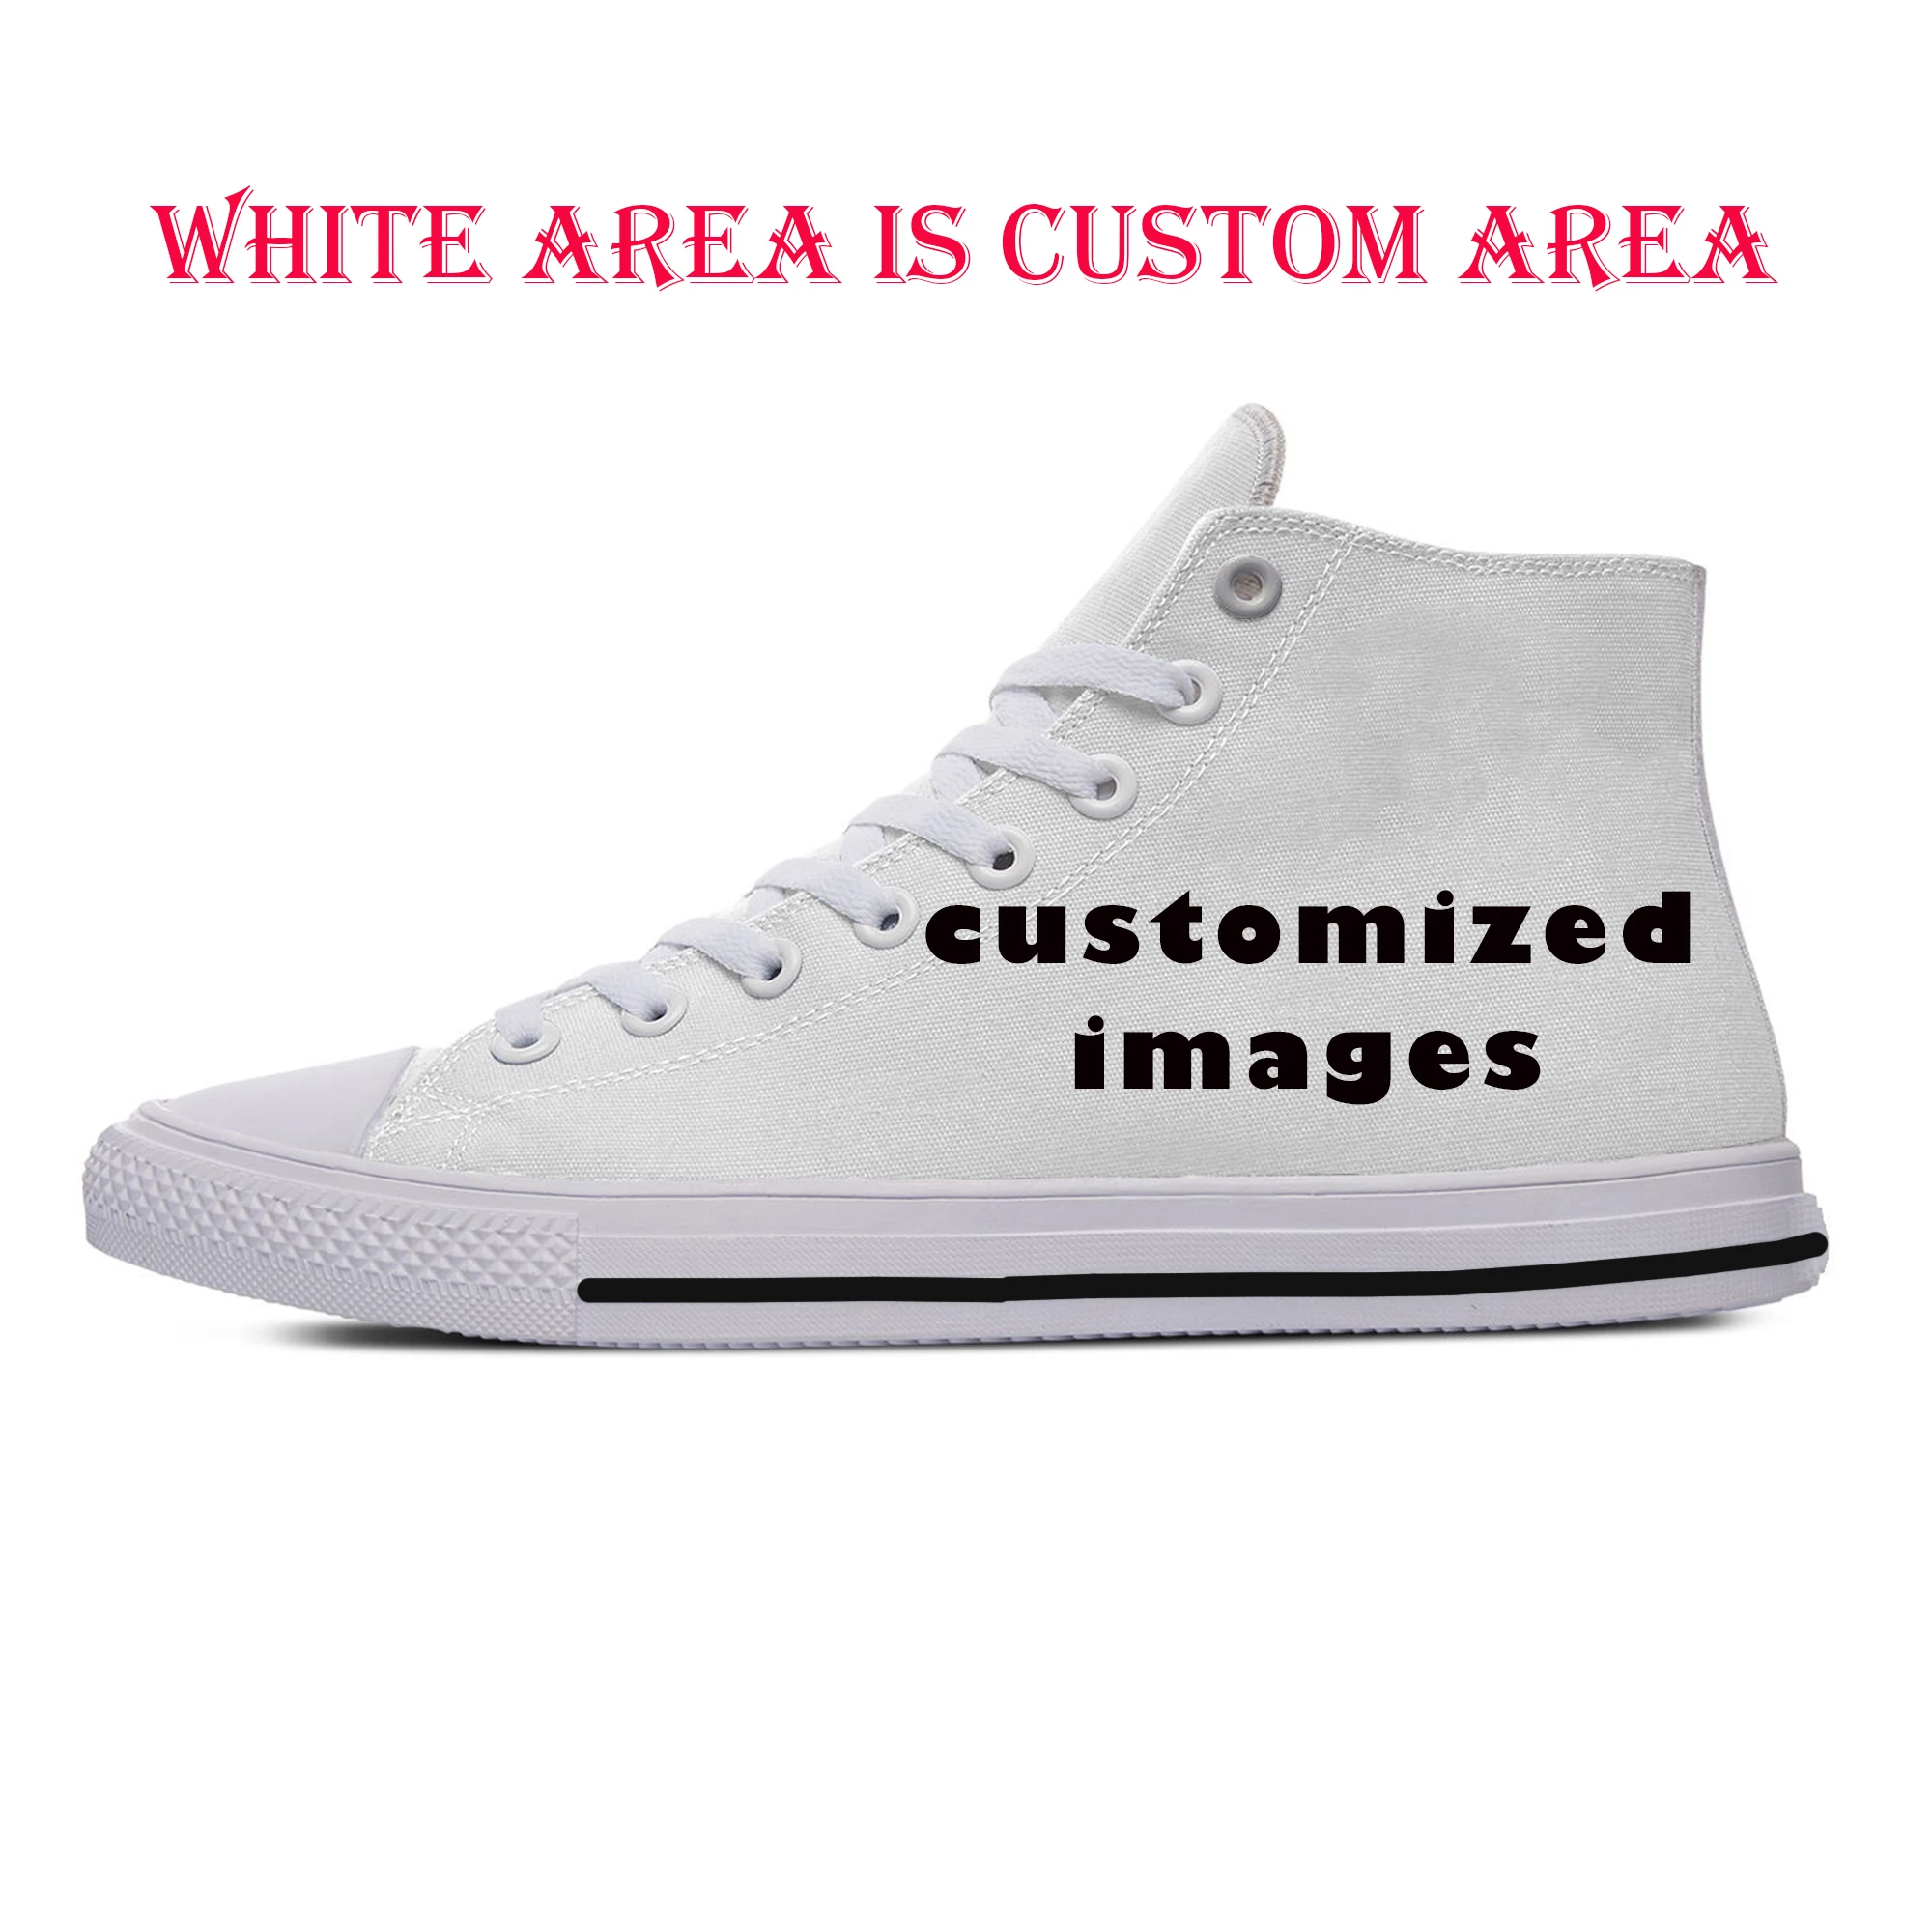 

Custom Sneakers Hot Jumper Nicolas Cage Crazy Funny Stare At You Comfortable Canvas Trends Comfortable Ultra Light Sports Shoes